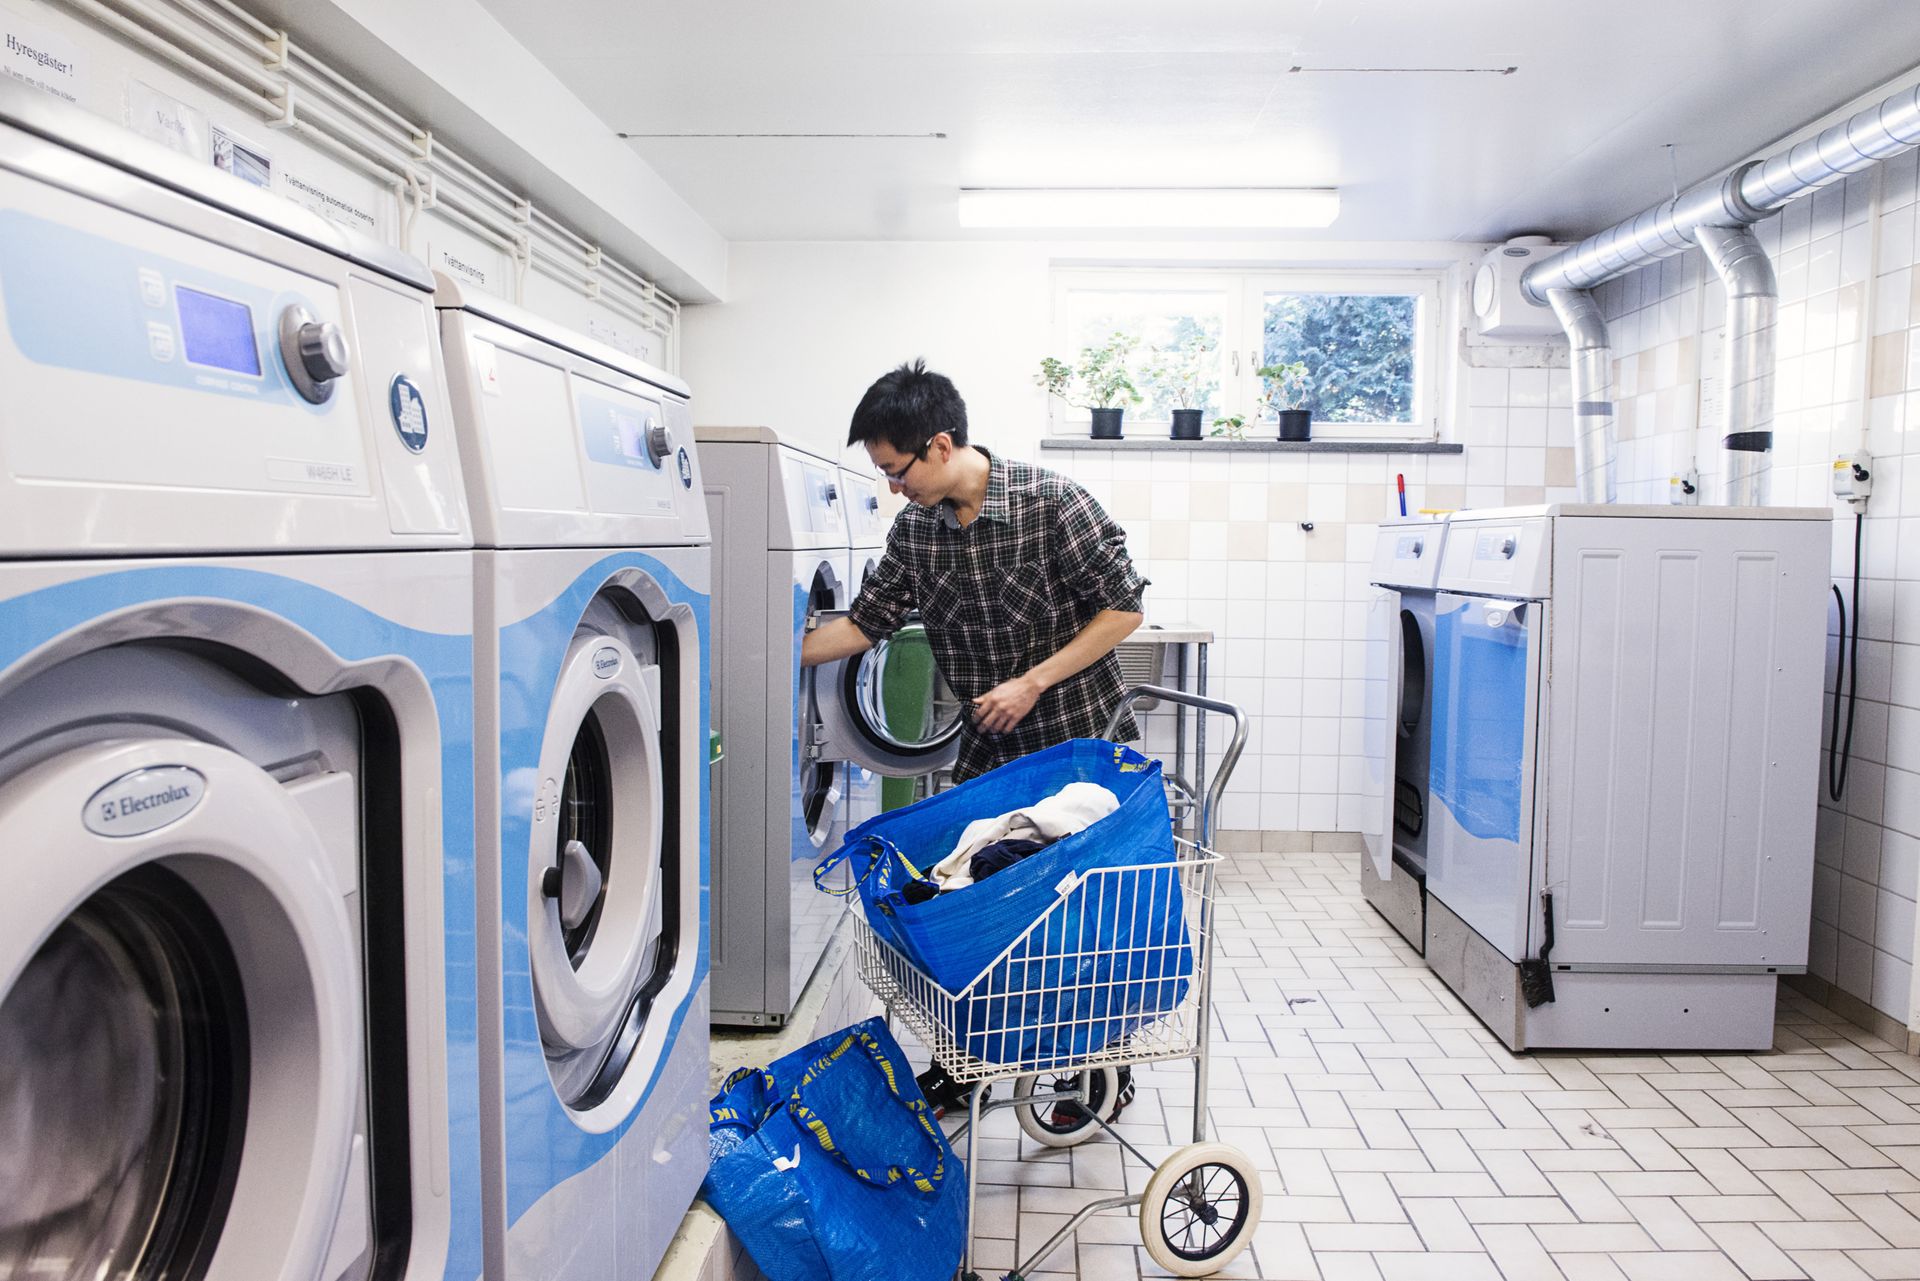 A guy doing laundry in a shared laundry facility.